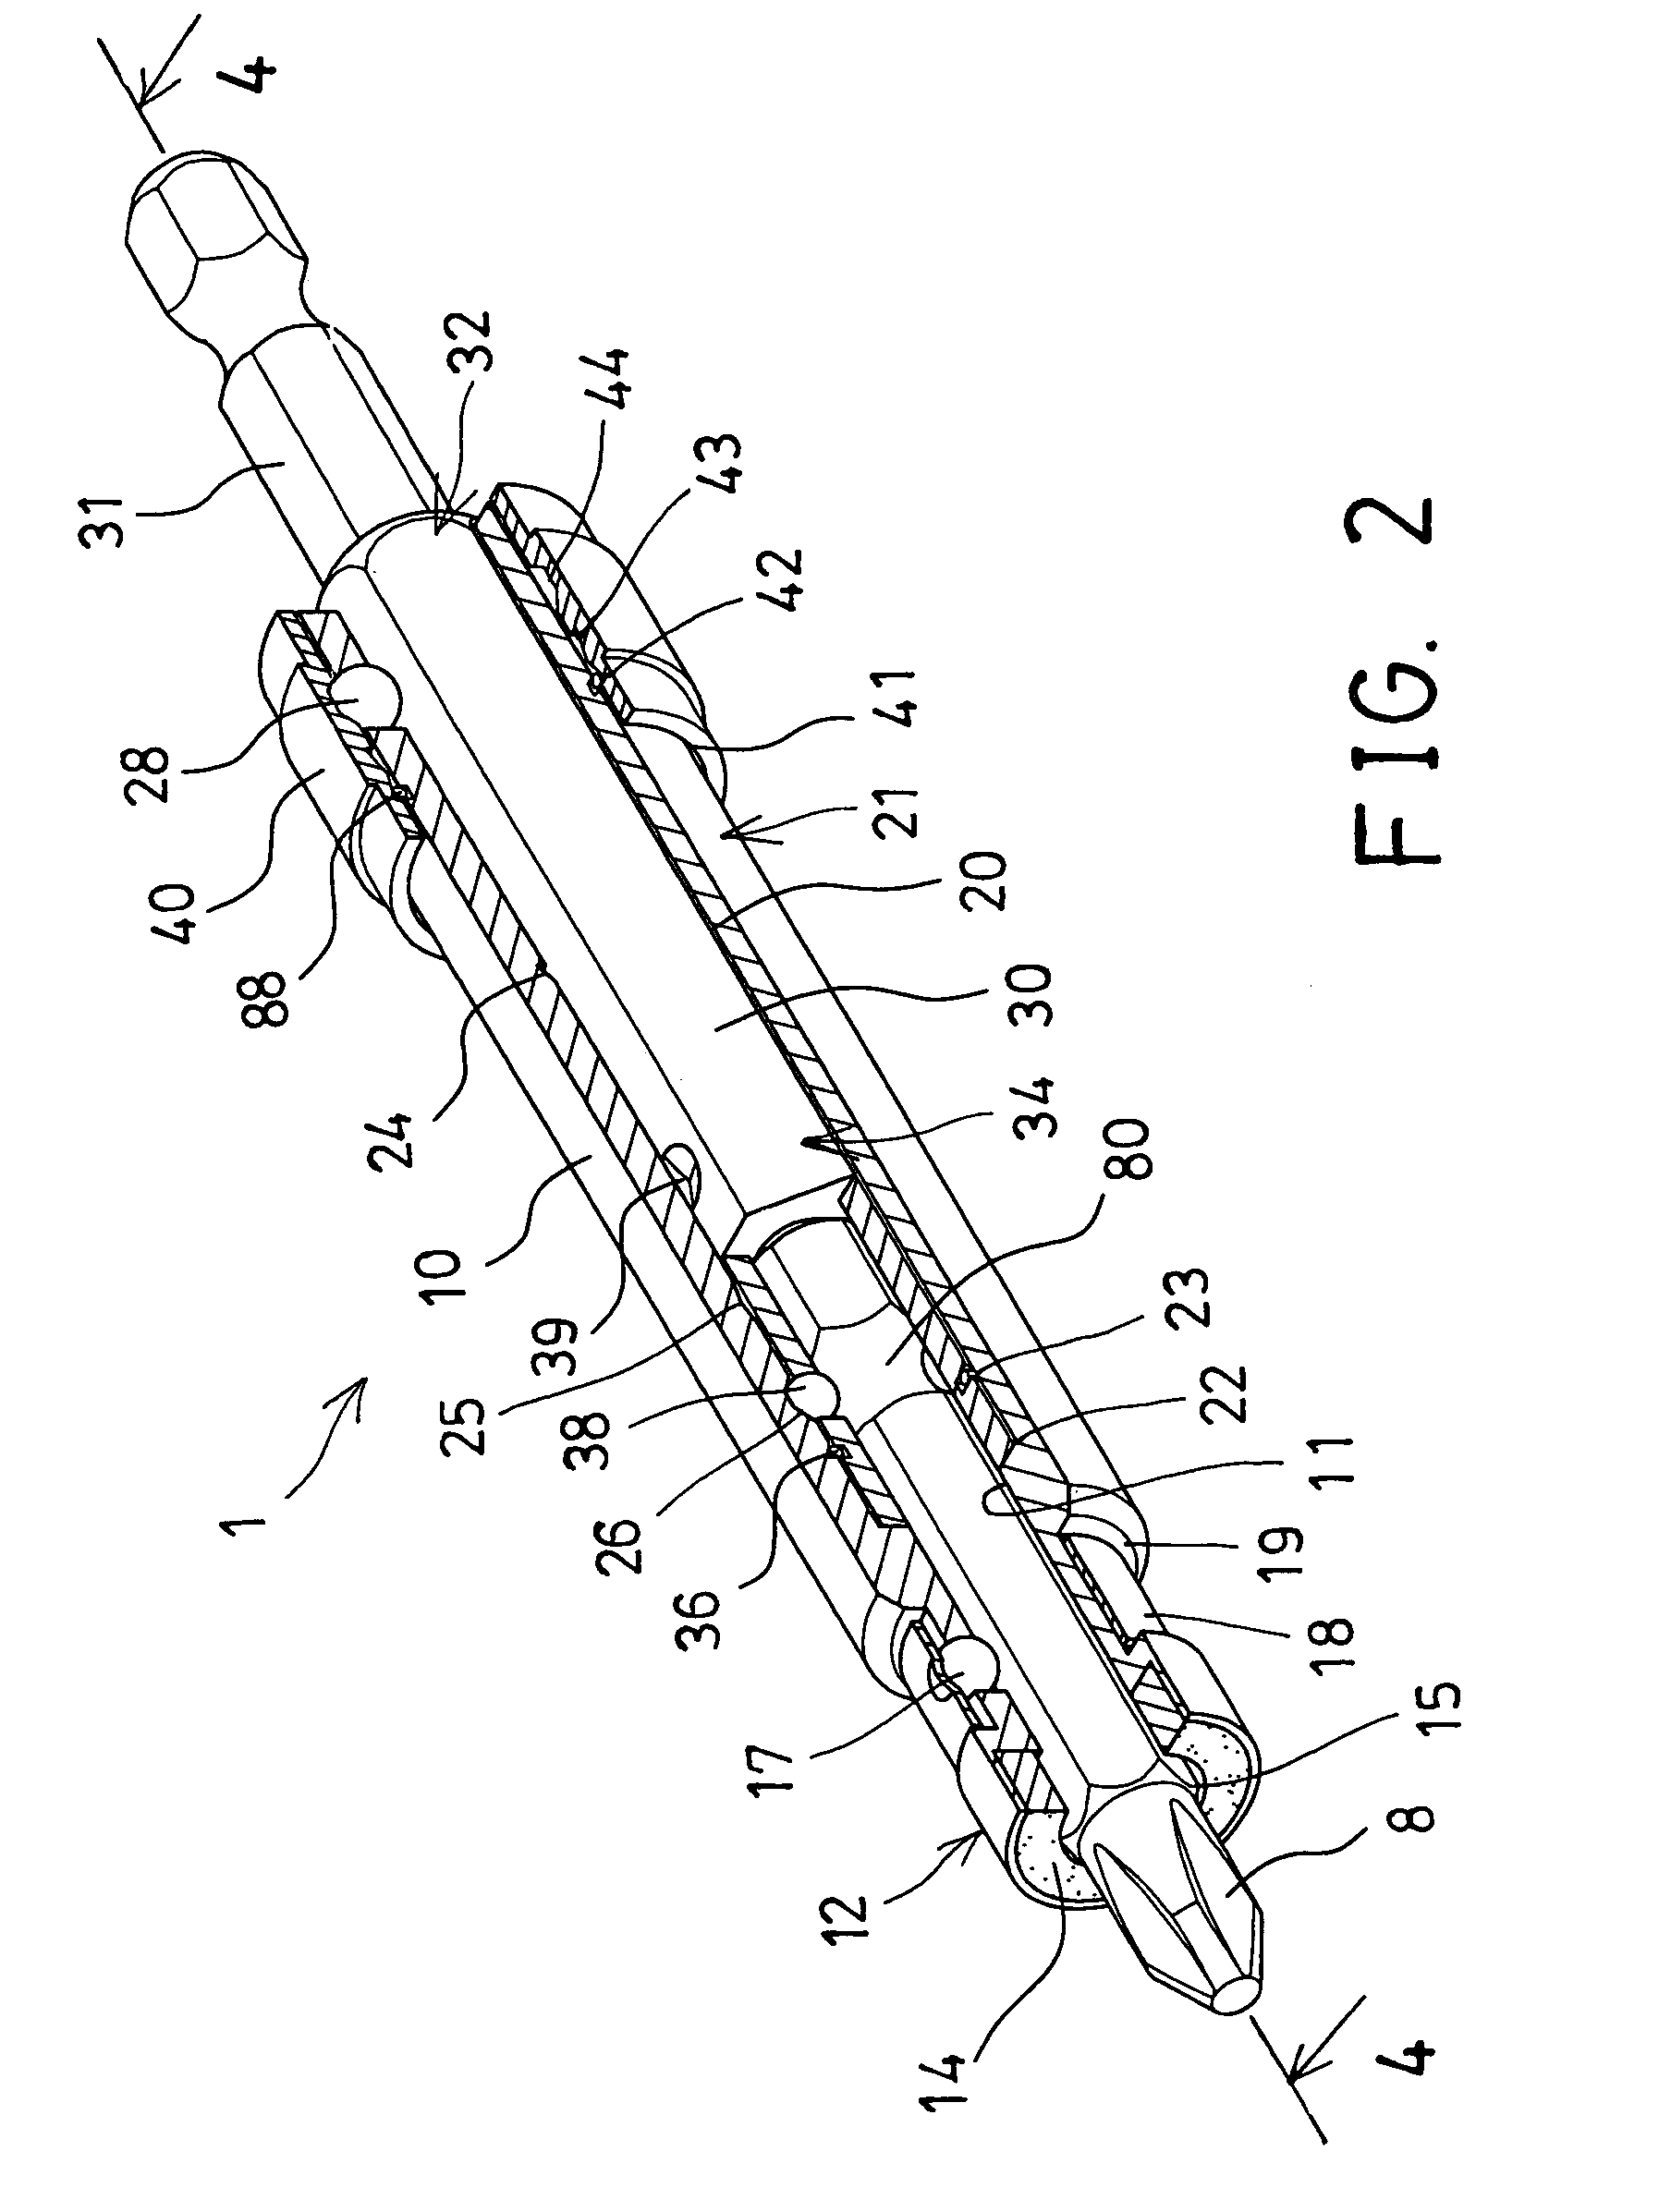 Tool retaining or connecting device